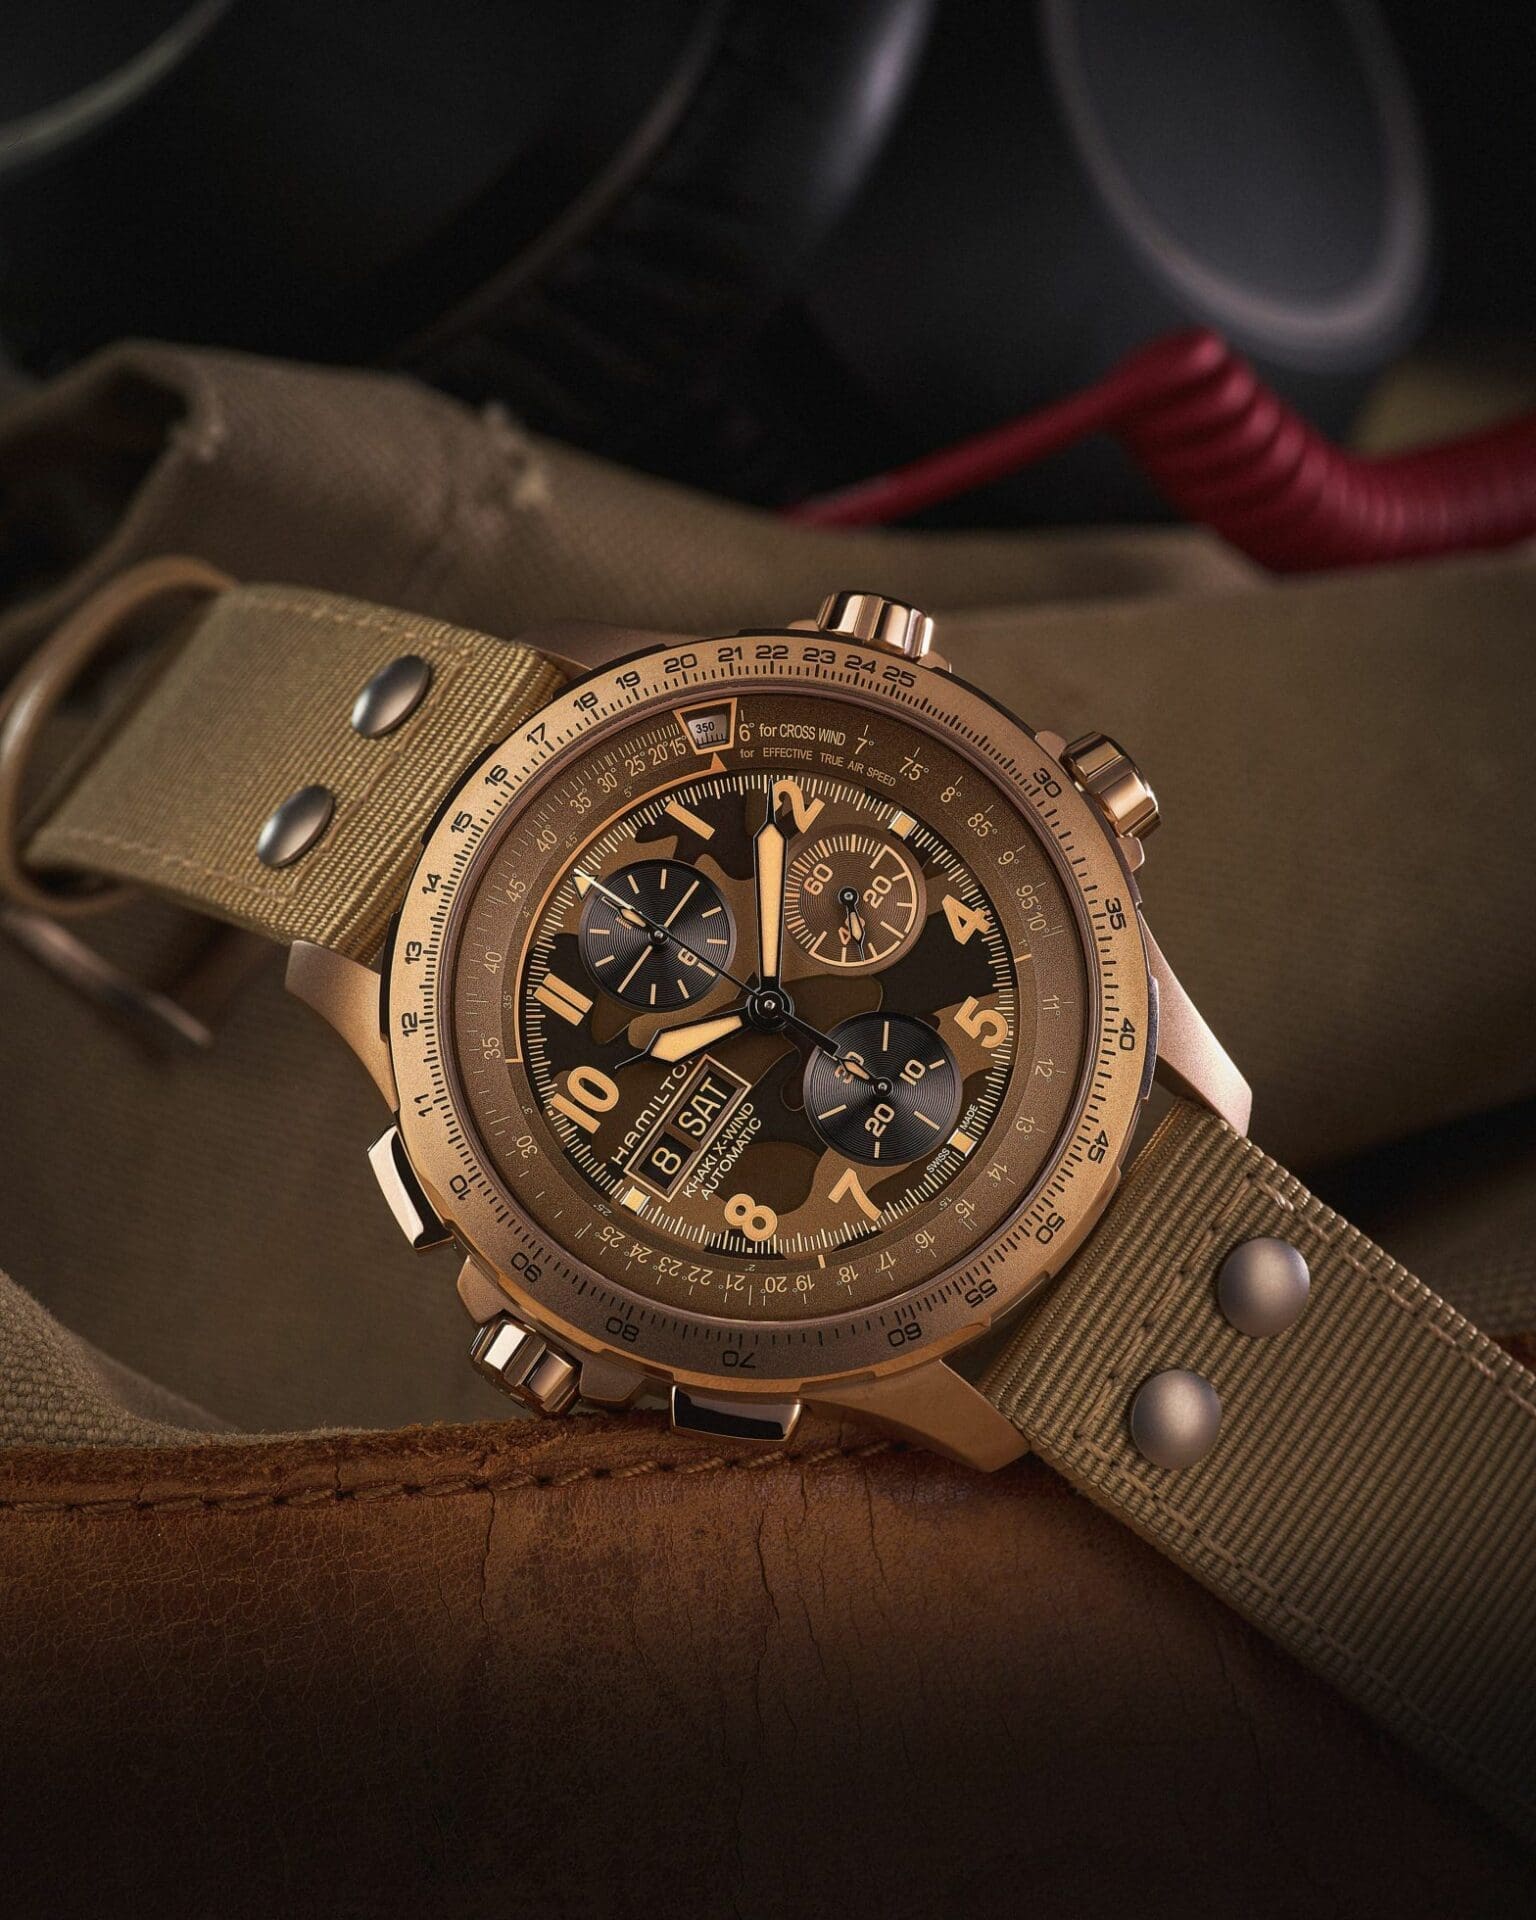 INTRODUCING: The Hamilton Khaki X-Wind collection takes flight with striking camouflage dials